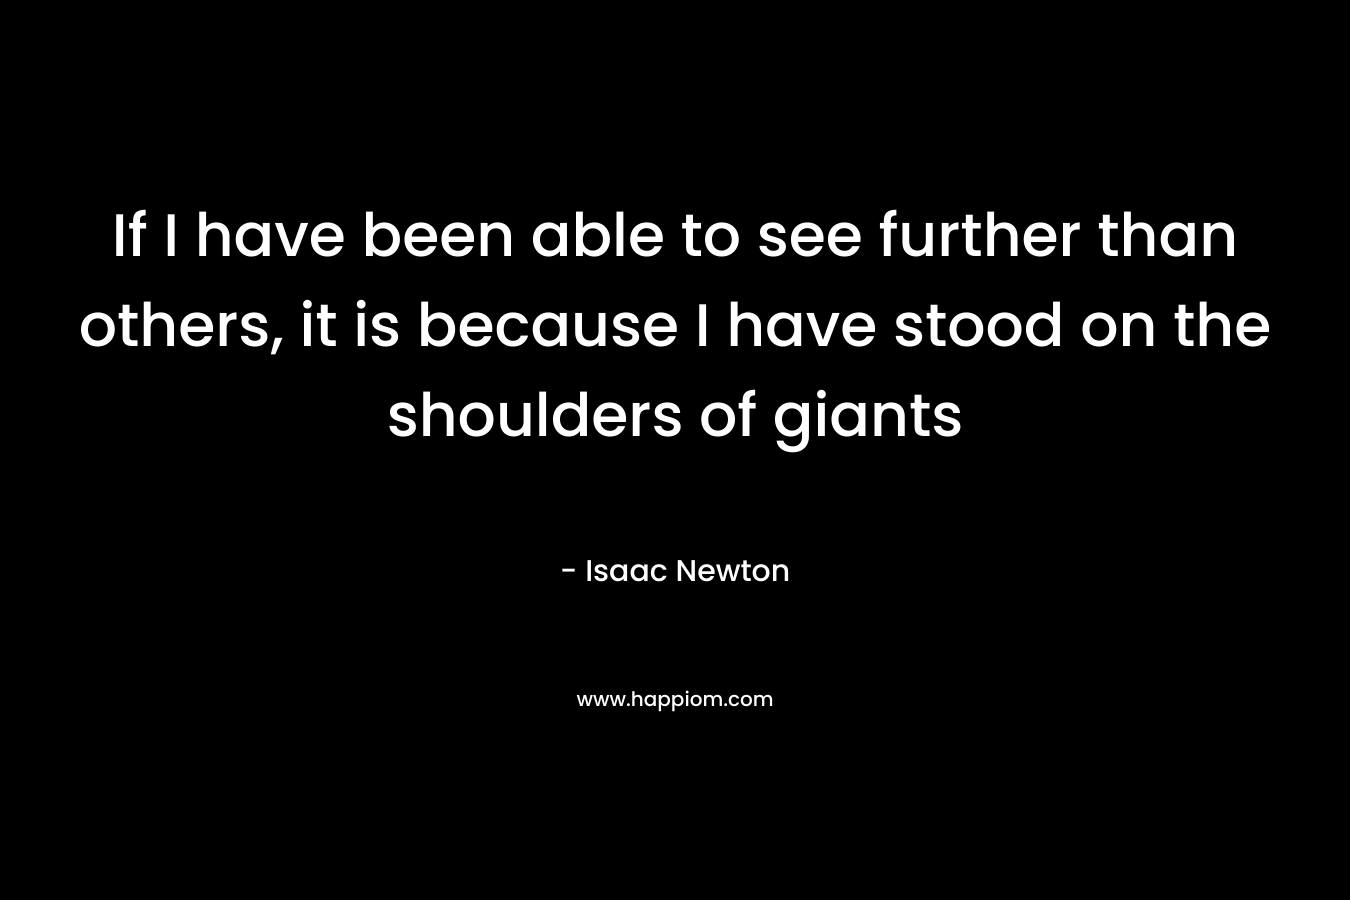 If I have been able to see further than others, it is because I have stood on the shoulders of giants – Isaac Newton